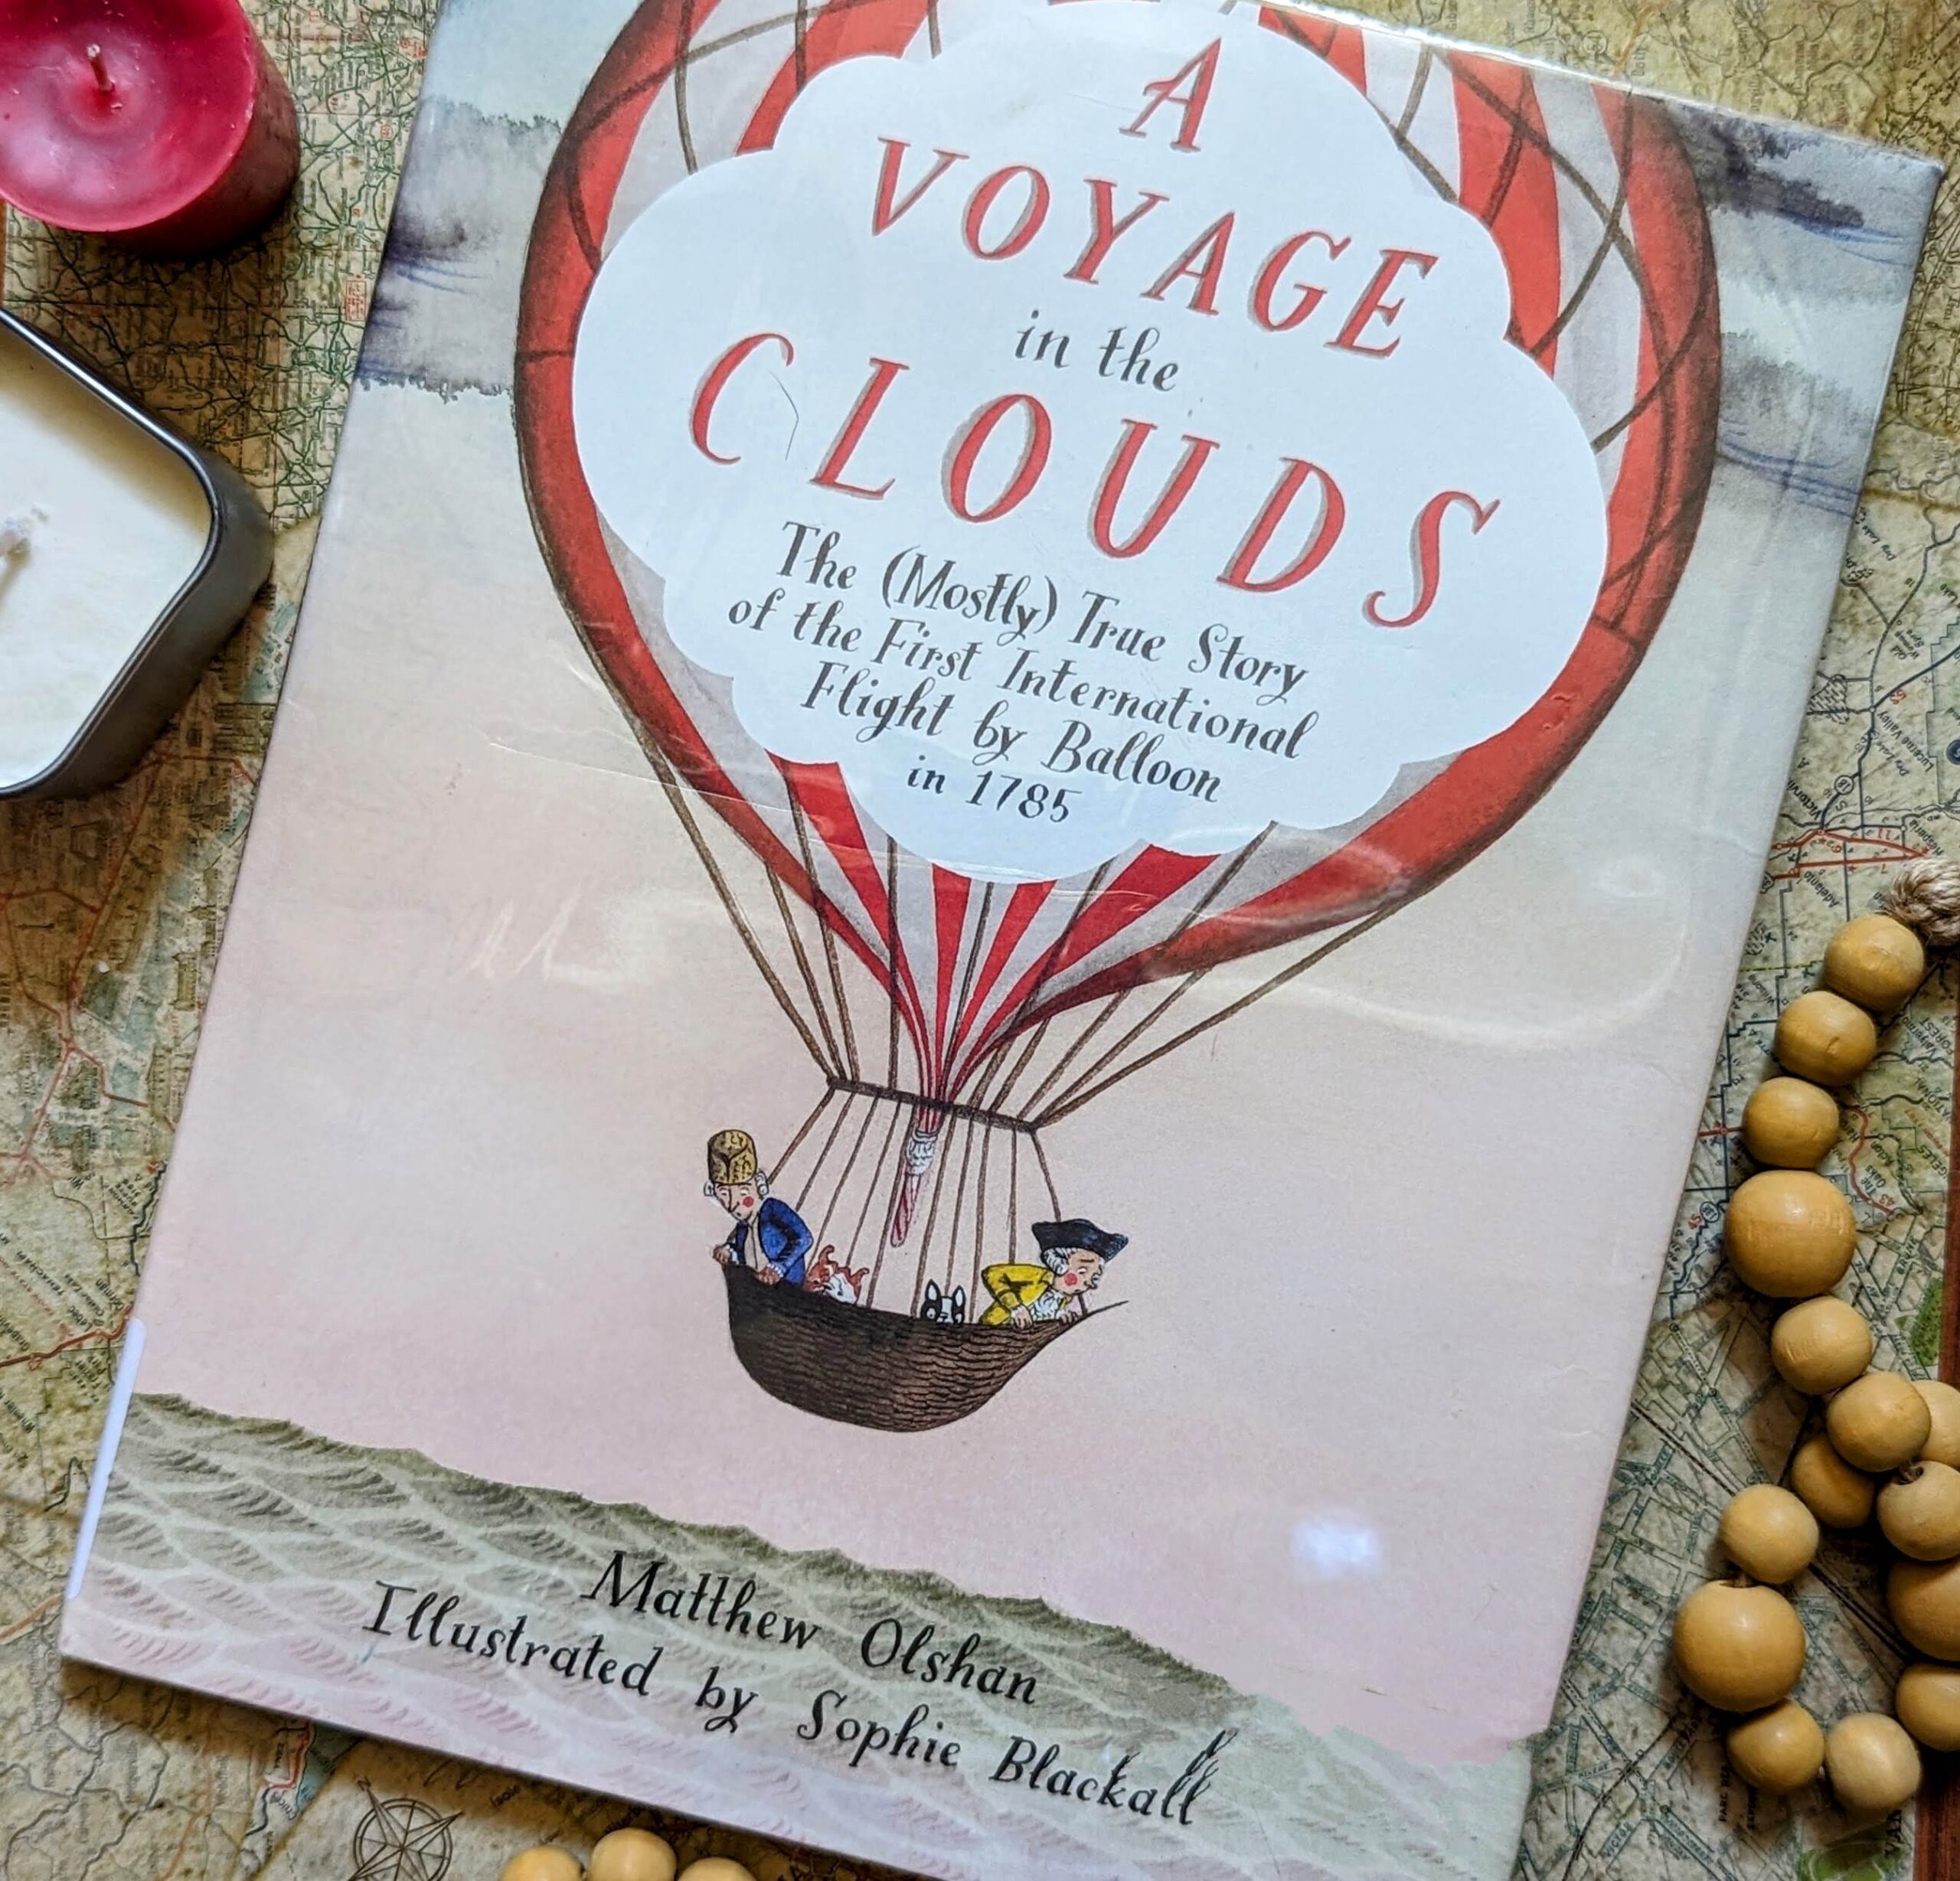 A Voyage in the Clouds by Matthew Olshan. About the first International balloon flight in 1785